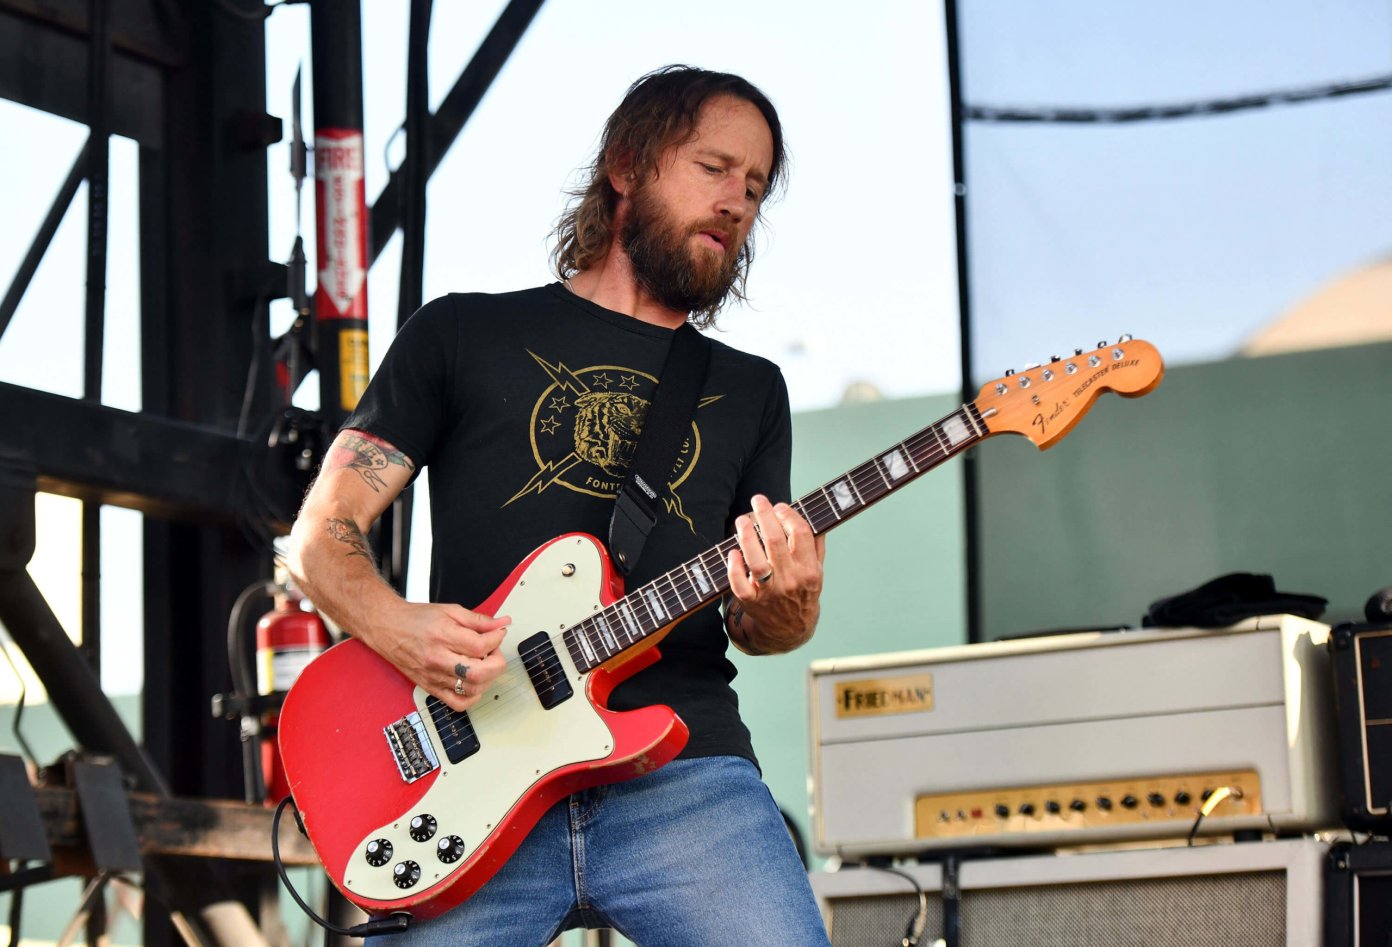 Chris Shiflett's on his P90s "I just fell in love with that guitar all